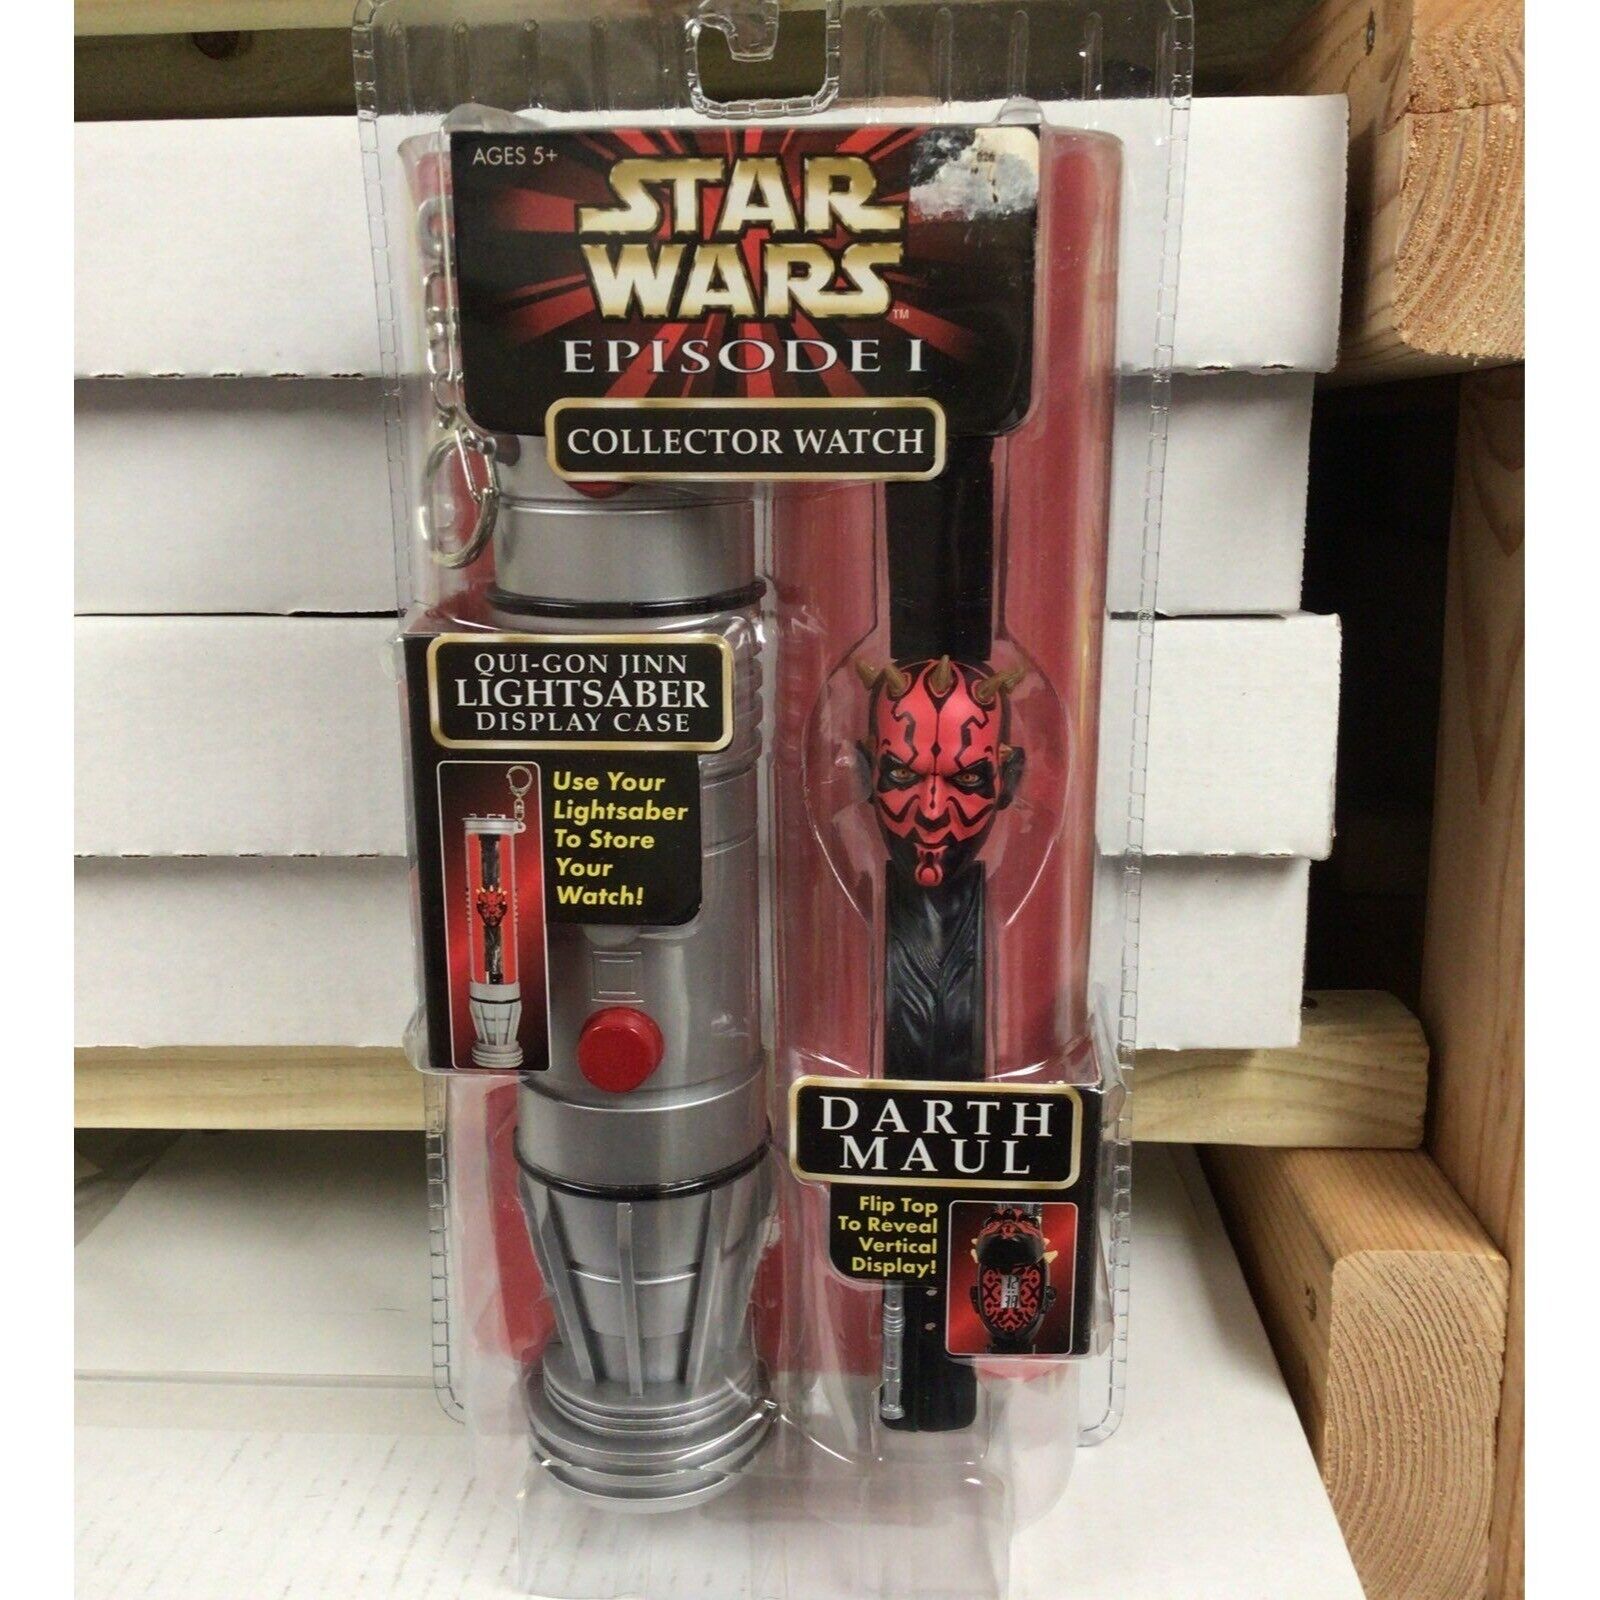 Star Wars E1 Darth Maul Collectors Watch w/ Lightsaber Case NEW 1999 Unopened